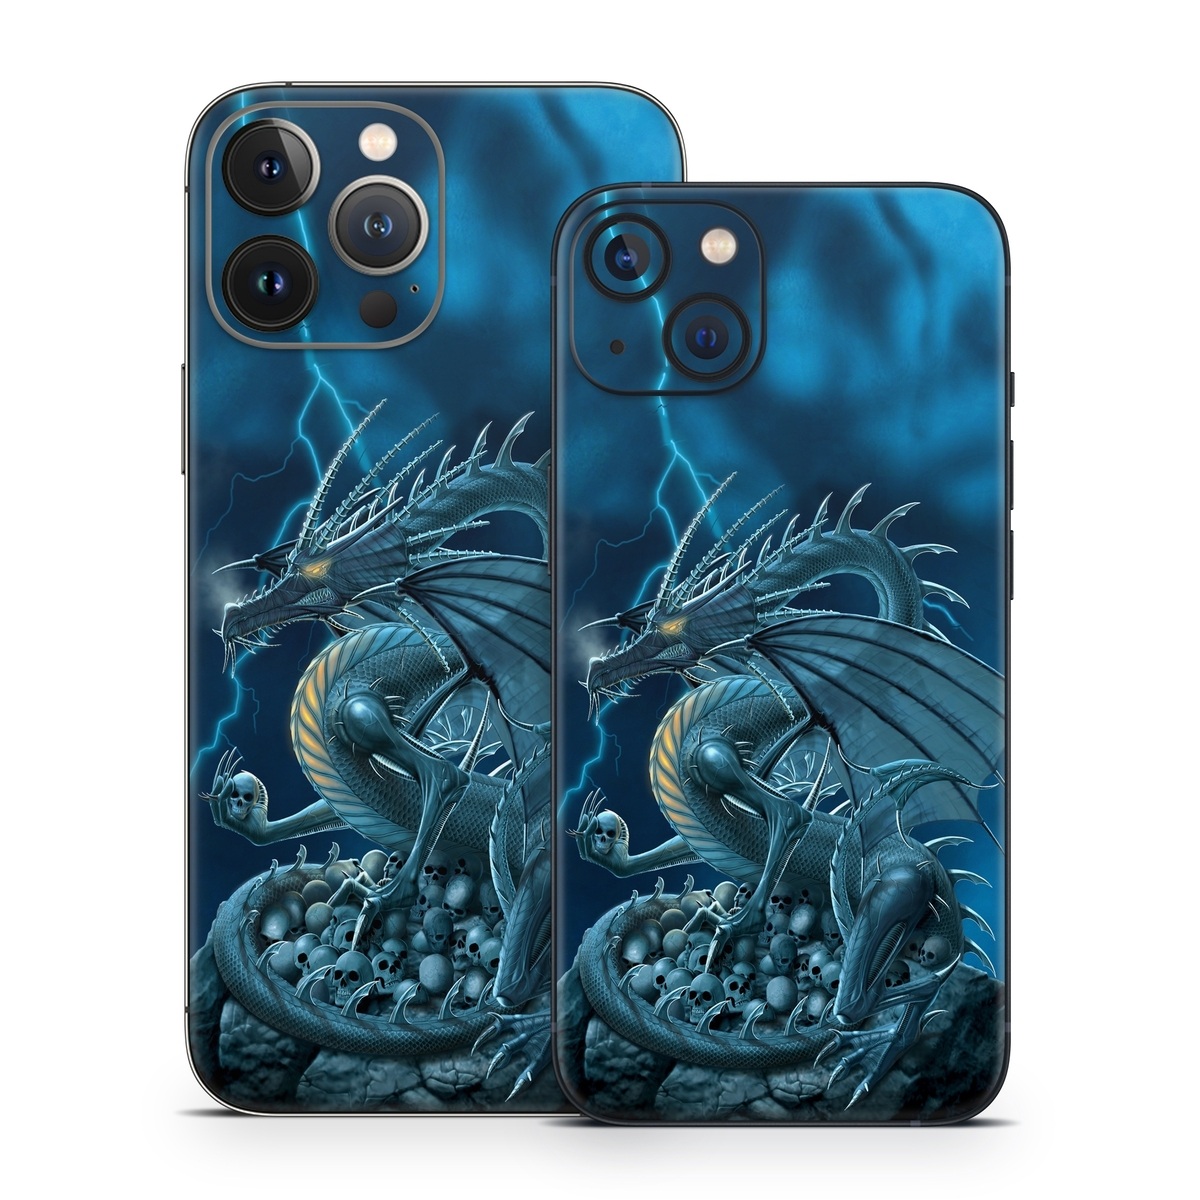 iPhone 13 Series Skin design of Cg artwork, Dragon, Mythology, Fictional character, Illustration, Mythical creature, Art, Demon, with blue, yellow colors